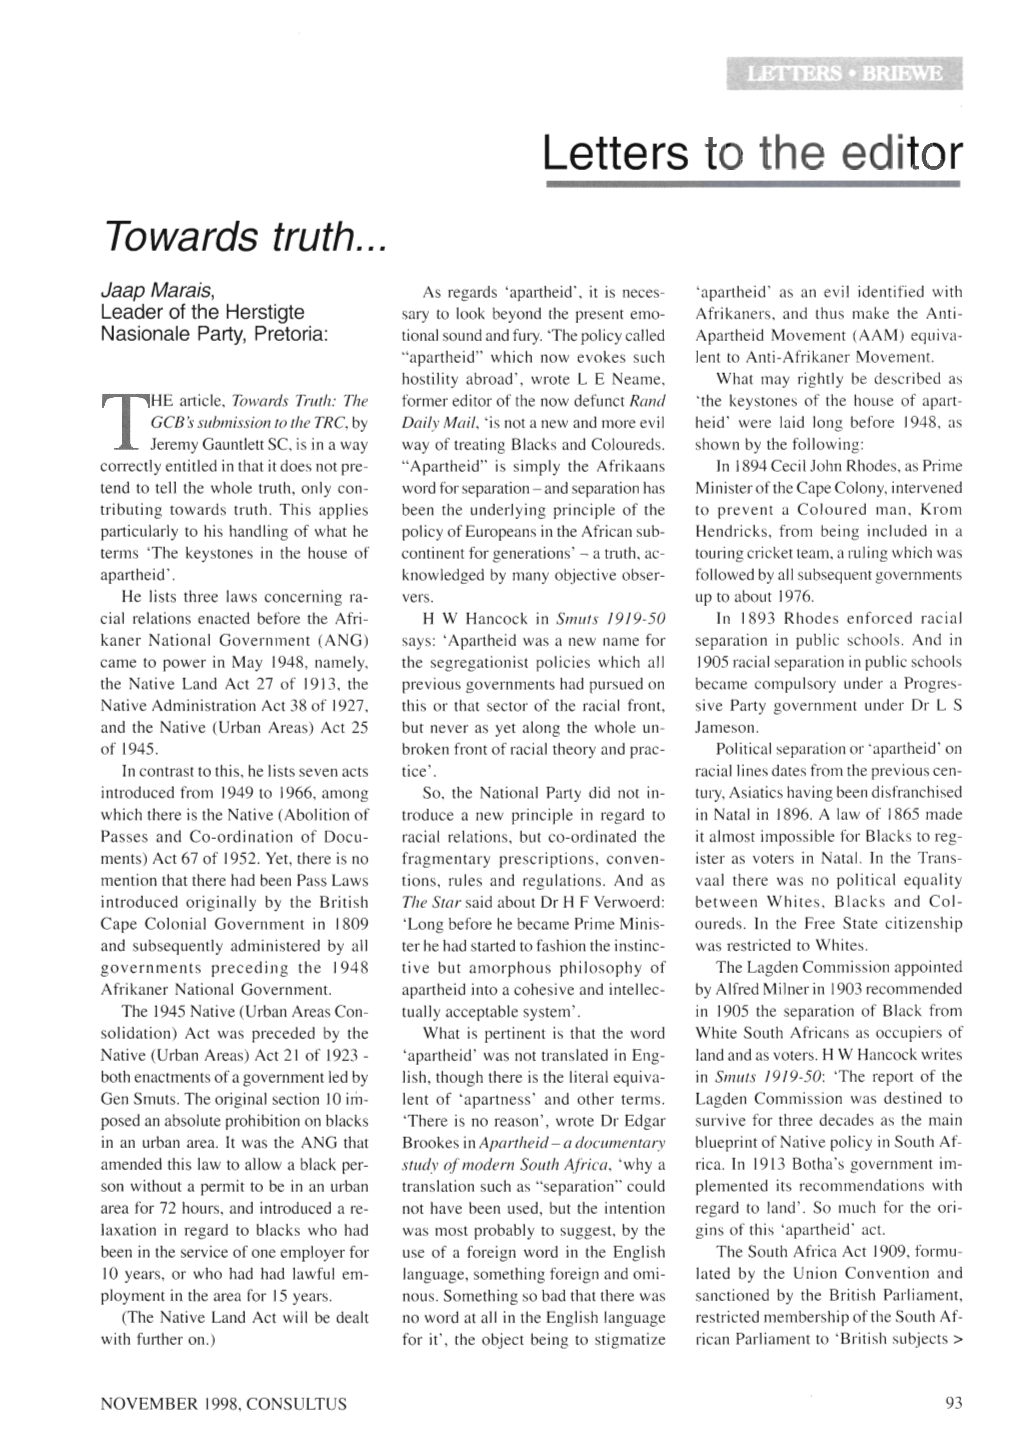 Letters to the Editor Towards Truth